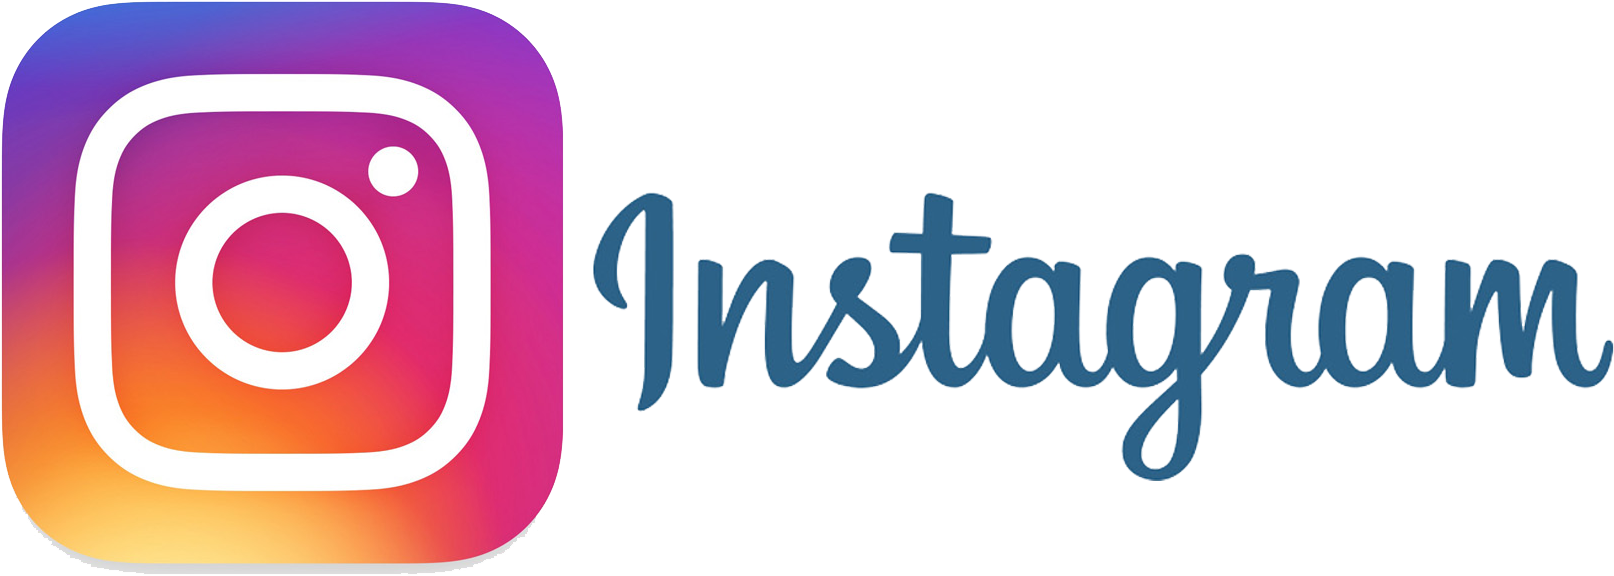 59 590993 follow us on instagram logo png clipart